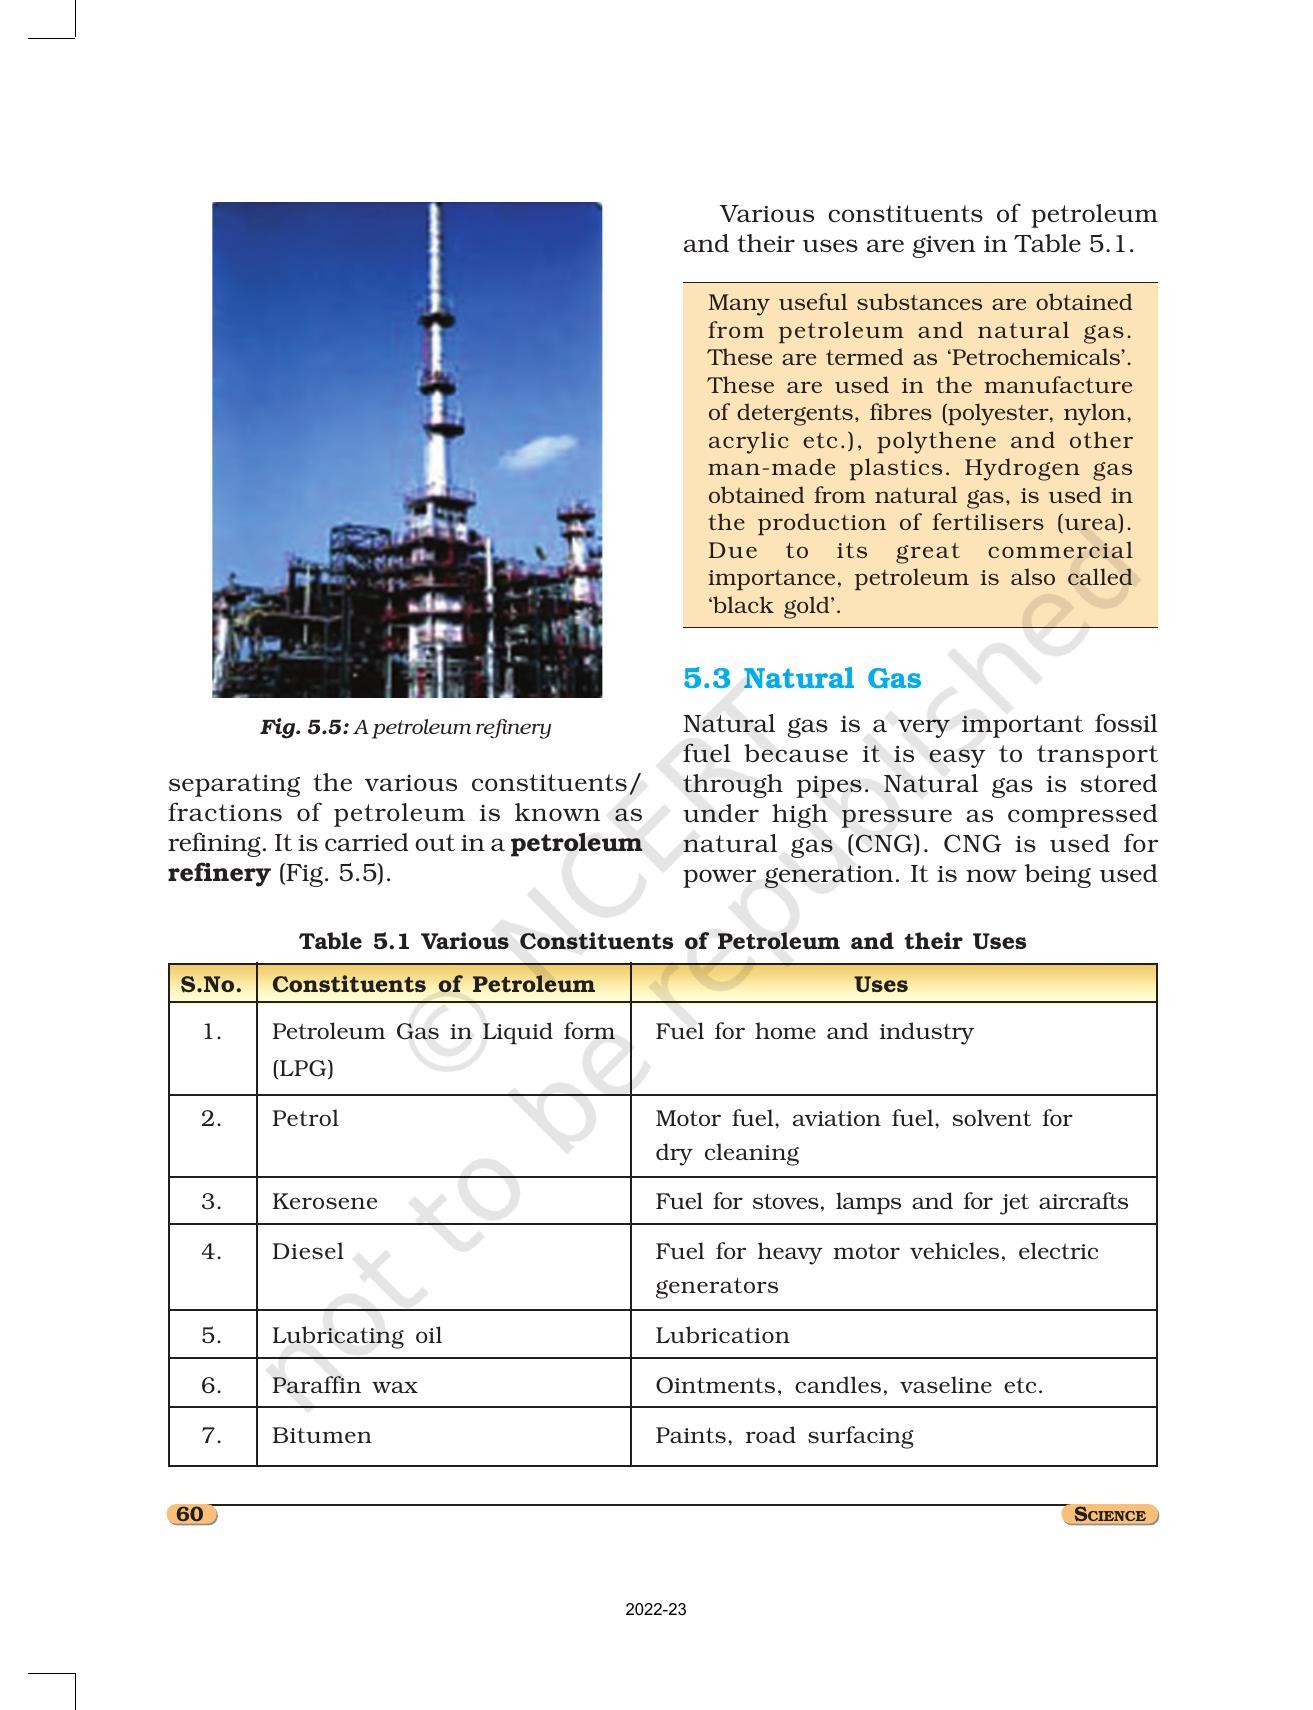 NCERT Book for Class 8 Science Chapter 5 Coal and Petroleum - Page 5